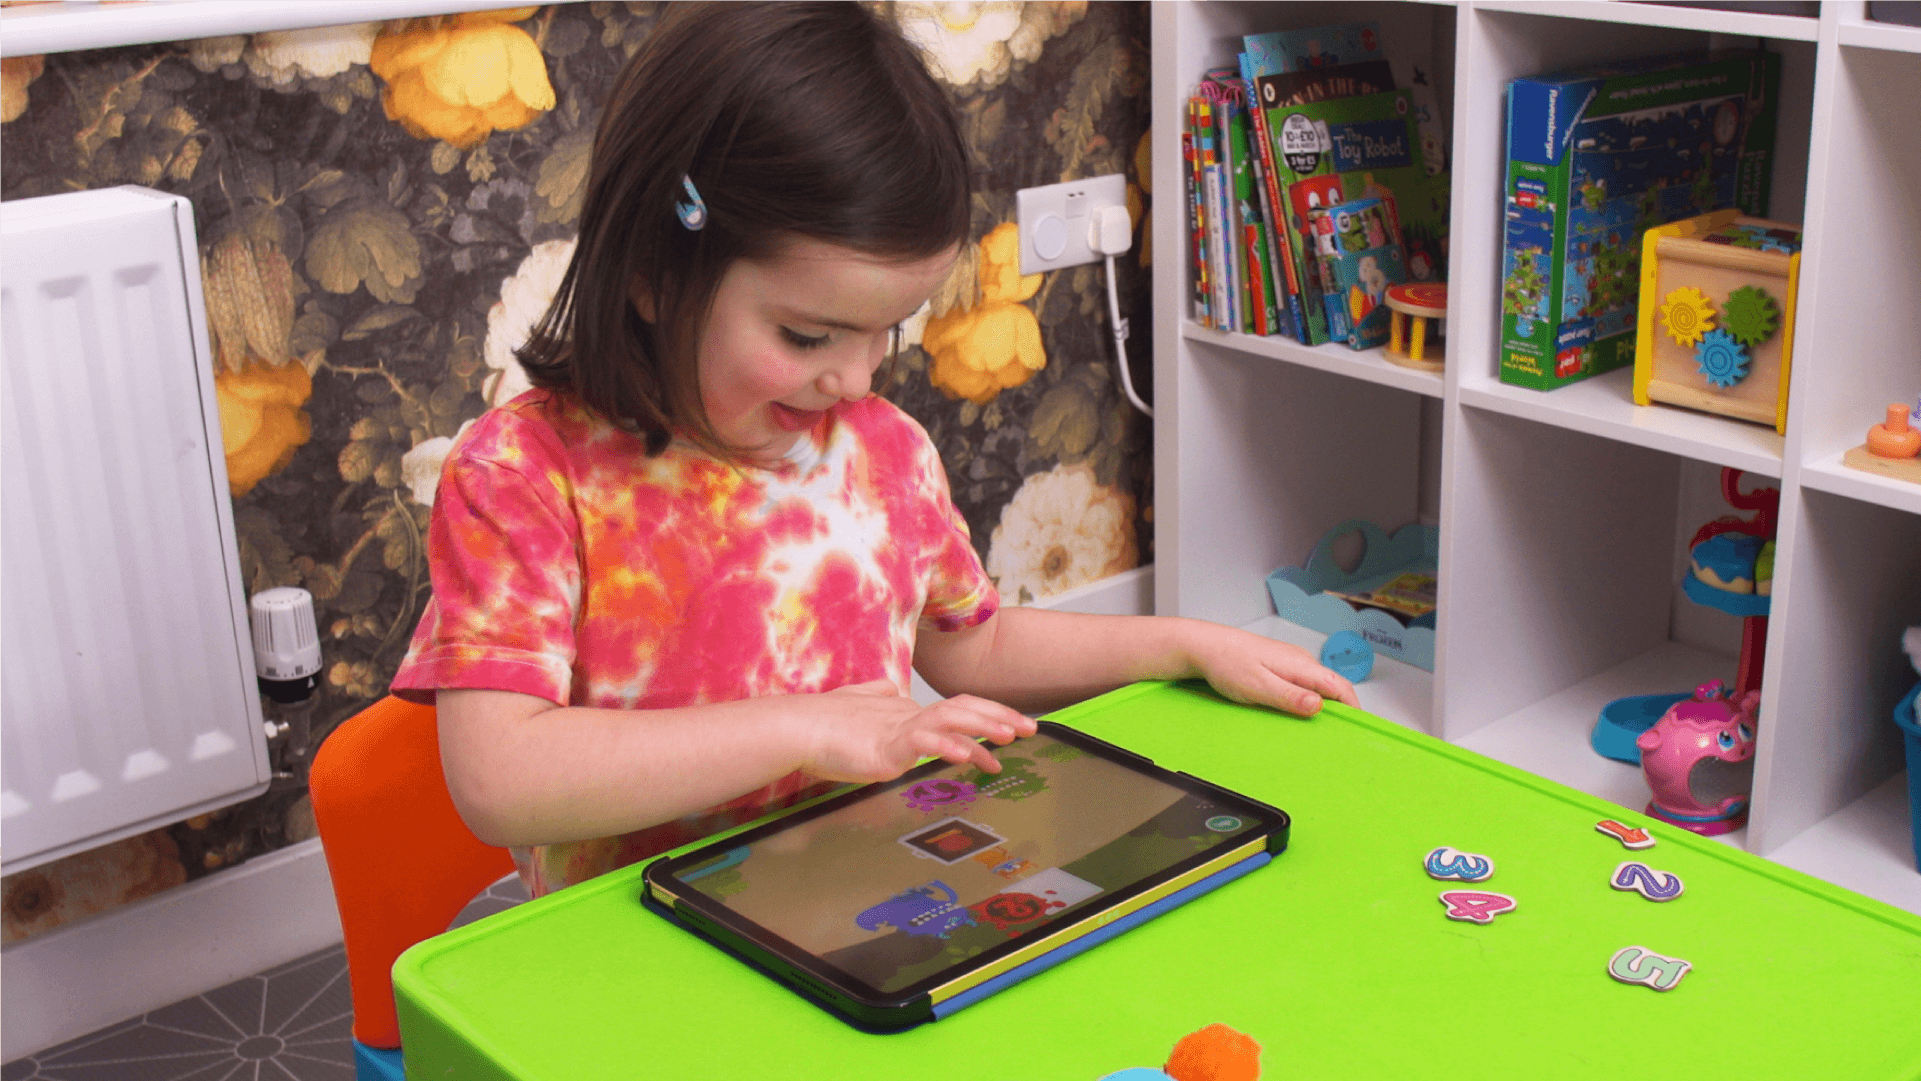 A happy young girl plays Teach Your Monster Number Skills on a tablet.